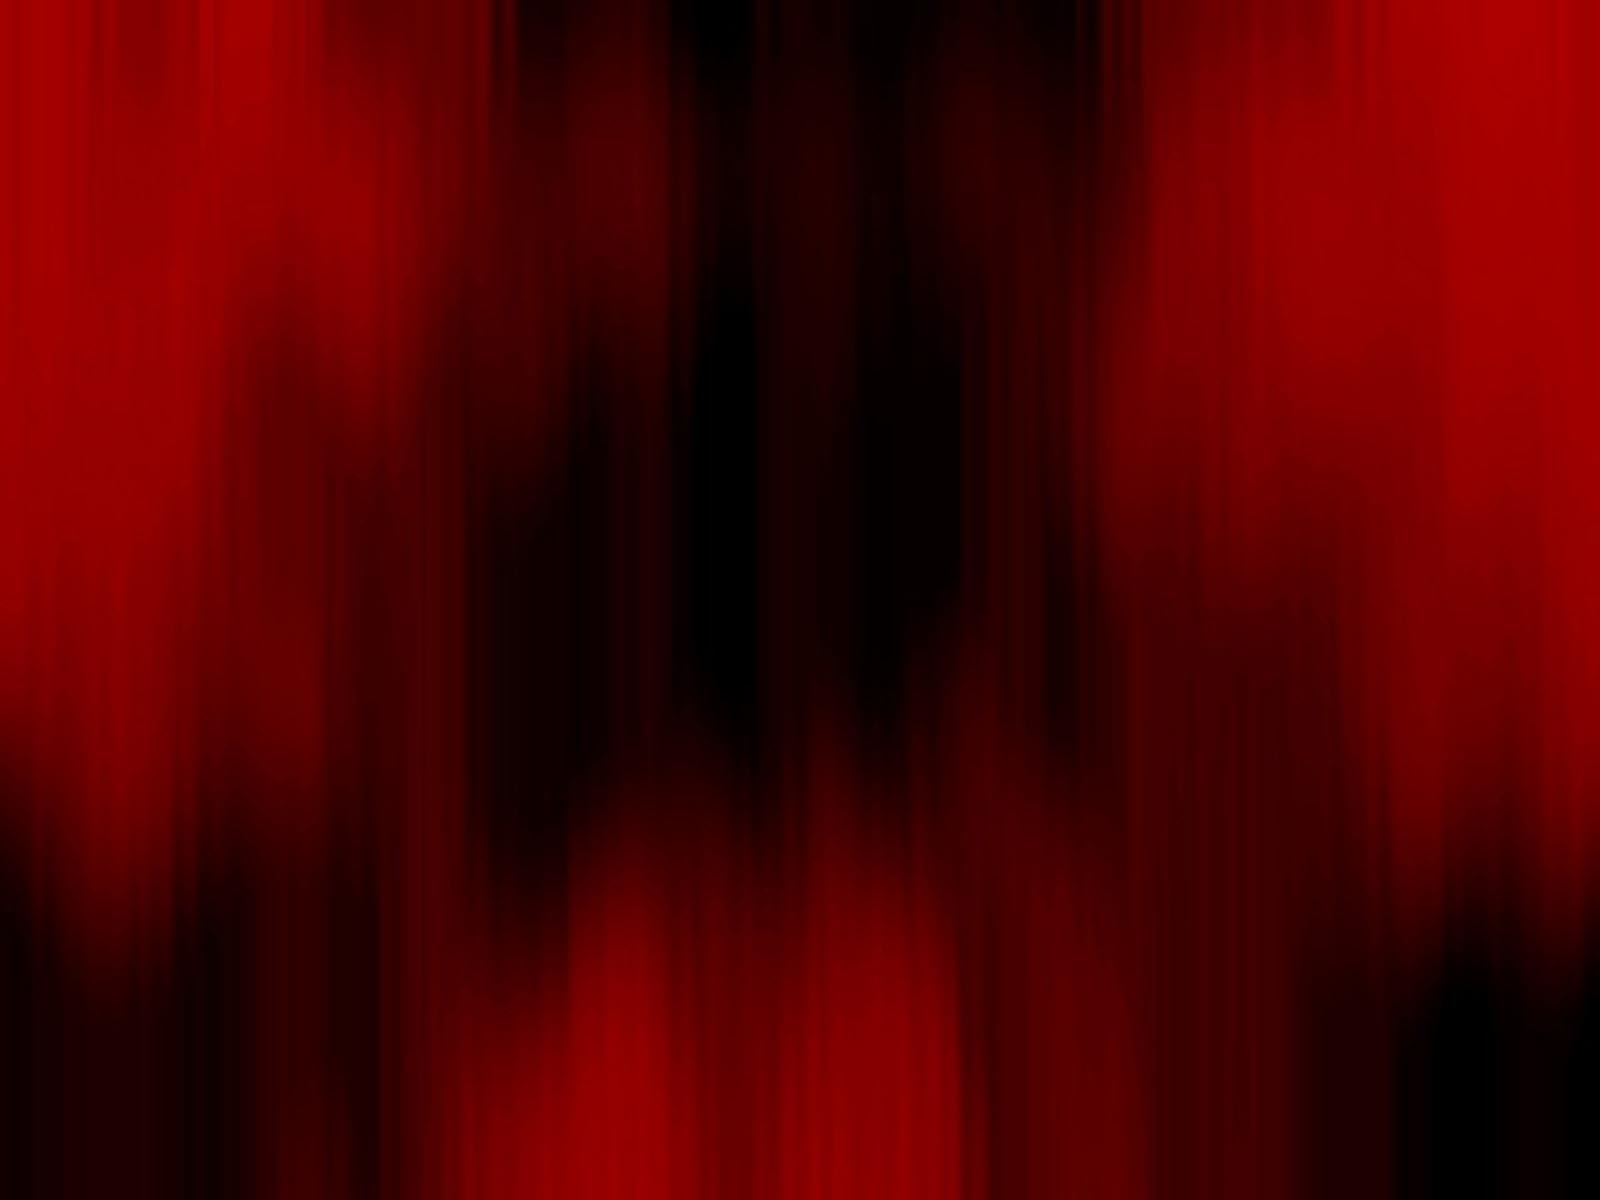 Red And Black BackgroundHD Wallpaper